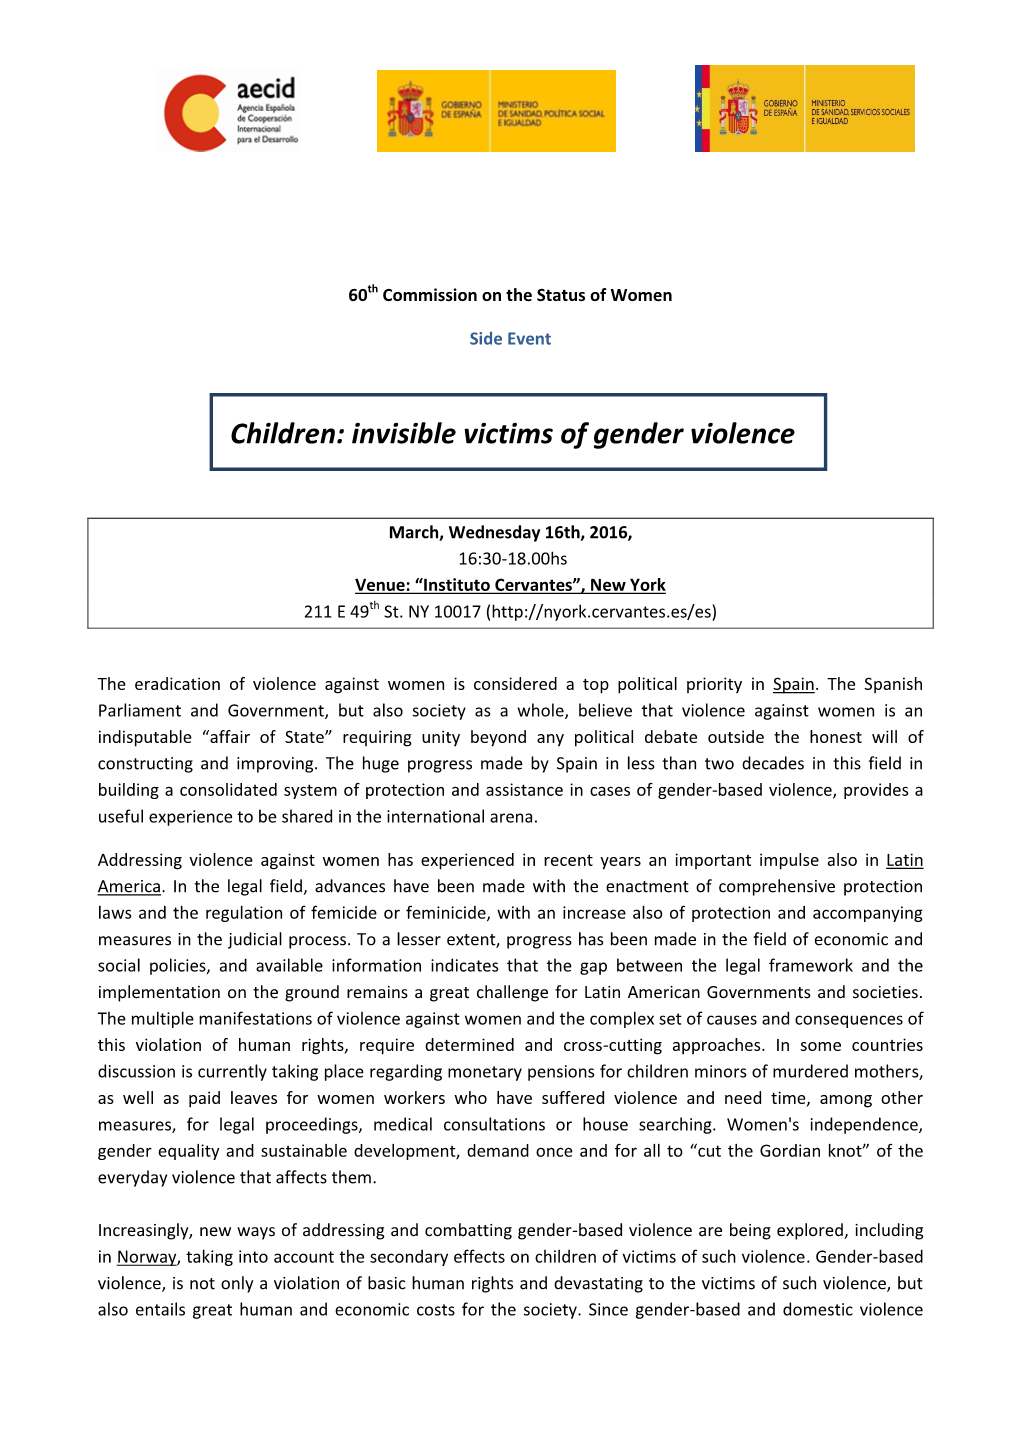 Children: Invisible Victims of Gender Violence